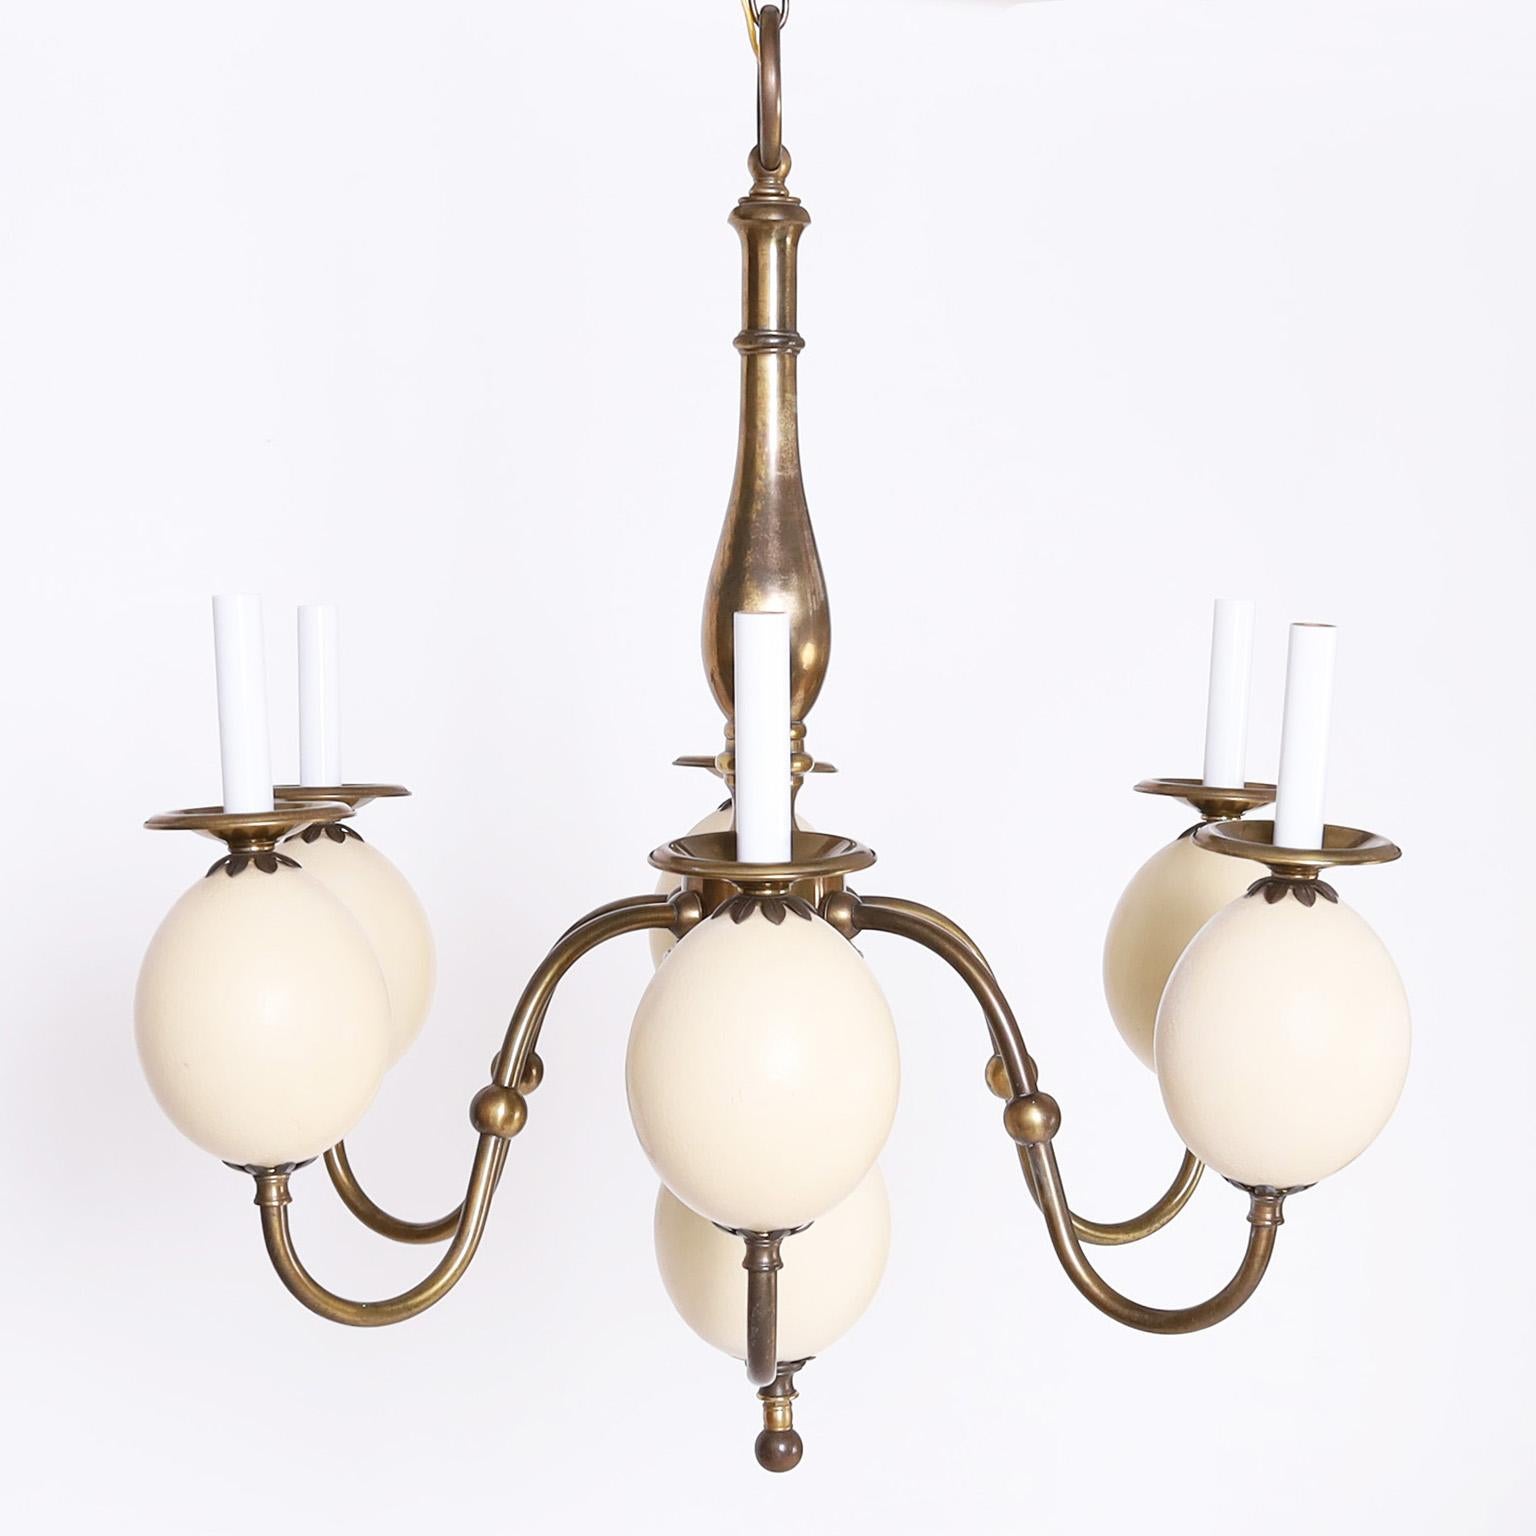 Attributed to Redmile, a chic six light chandelier crafted with brass in a classic Queen Anne form enhanced by faux ostrich eggs as bobeche supports and bottom finial.